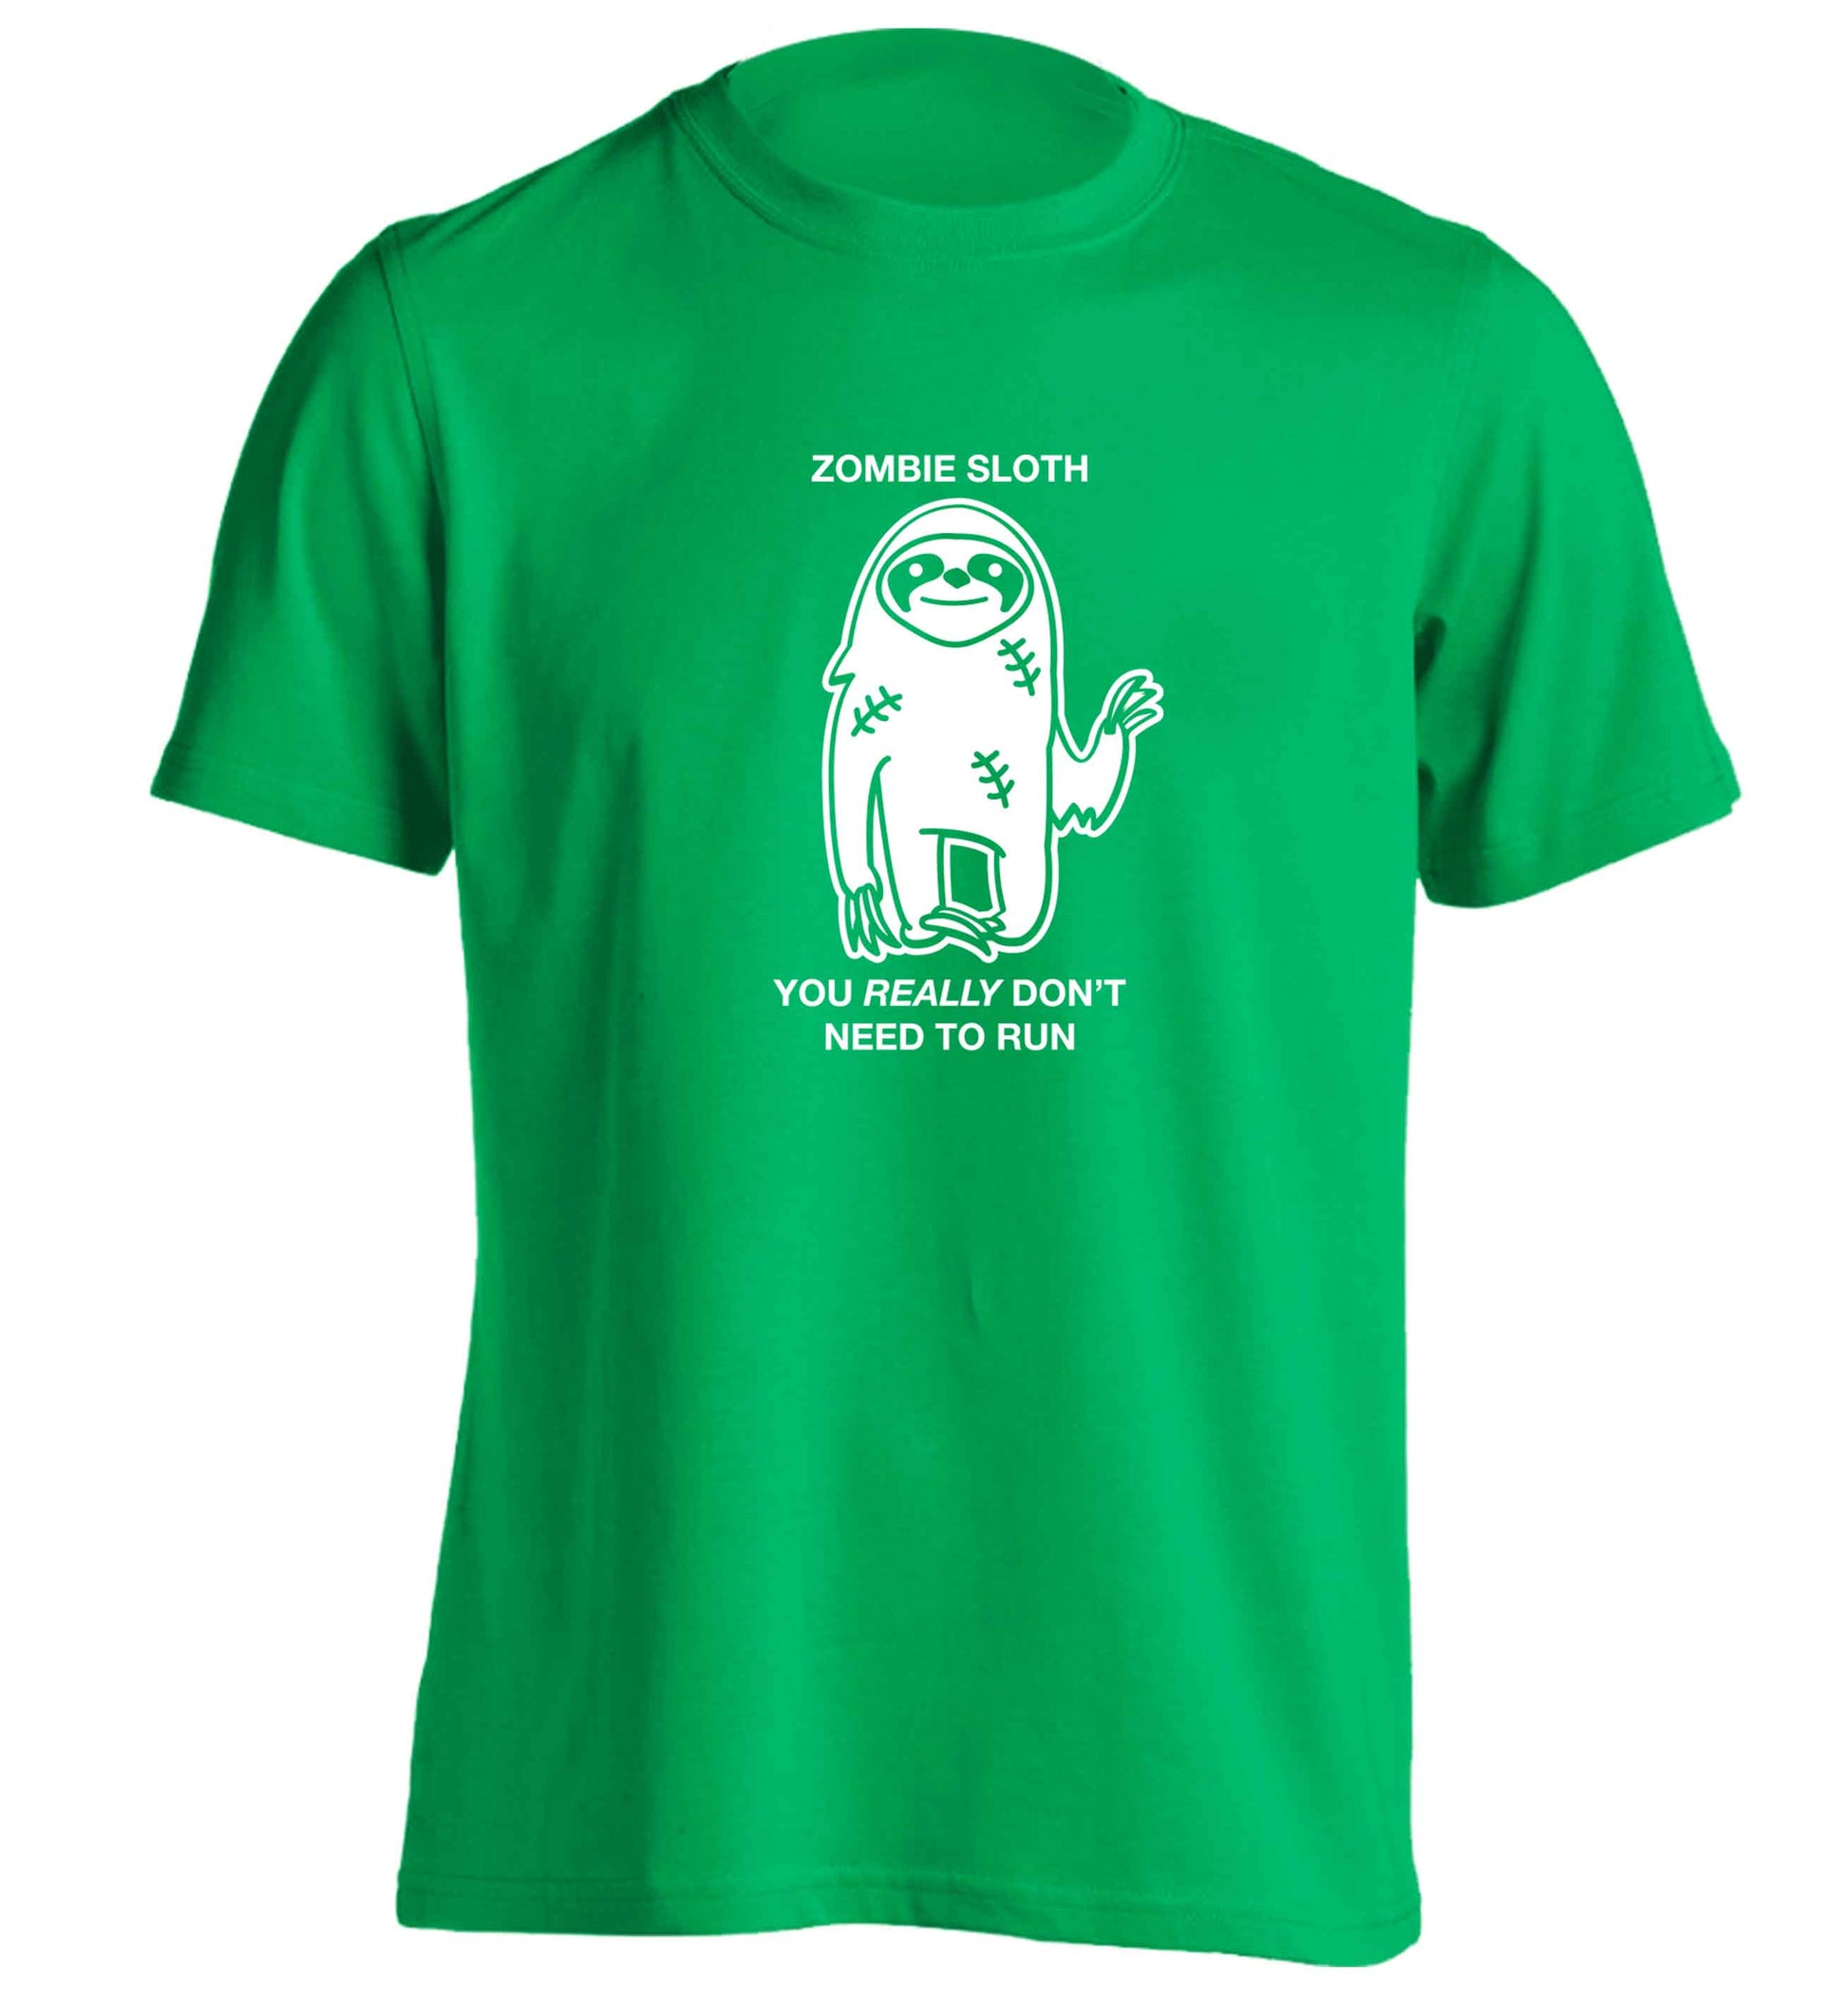 Zombie sloth you really don't need to run adults unisex green Tshirt 2XL